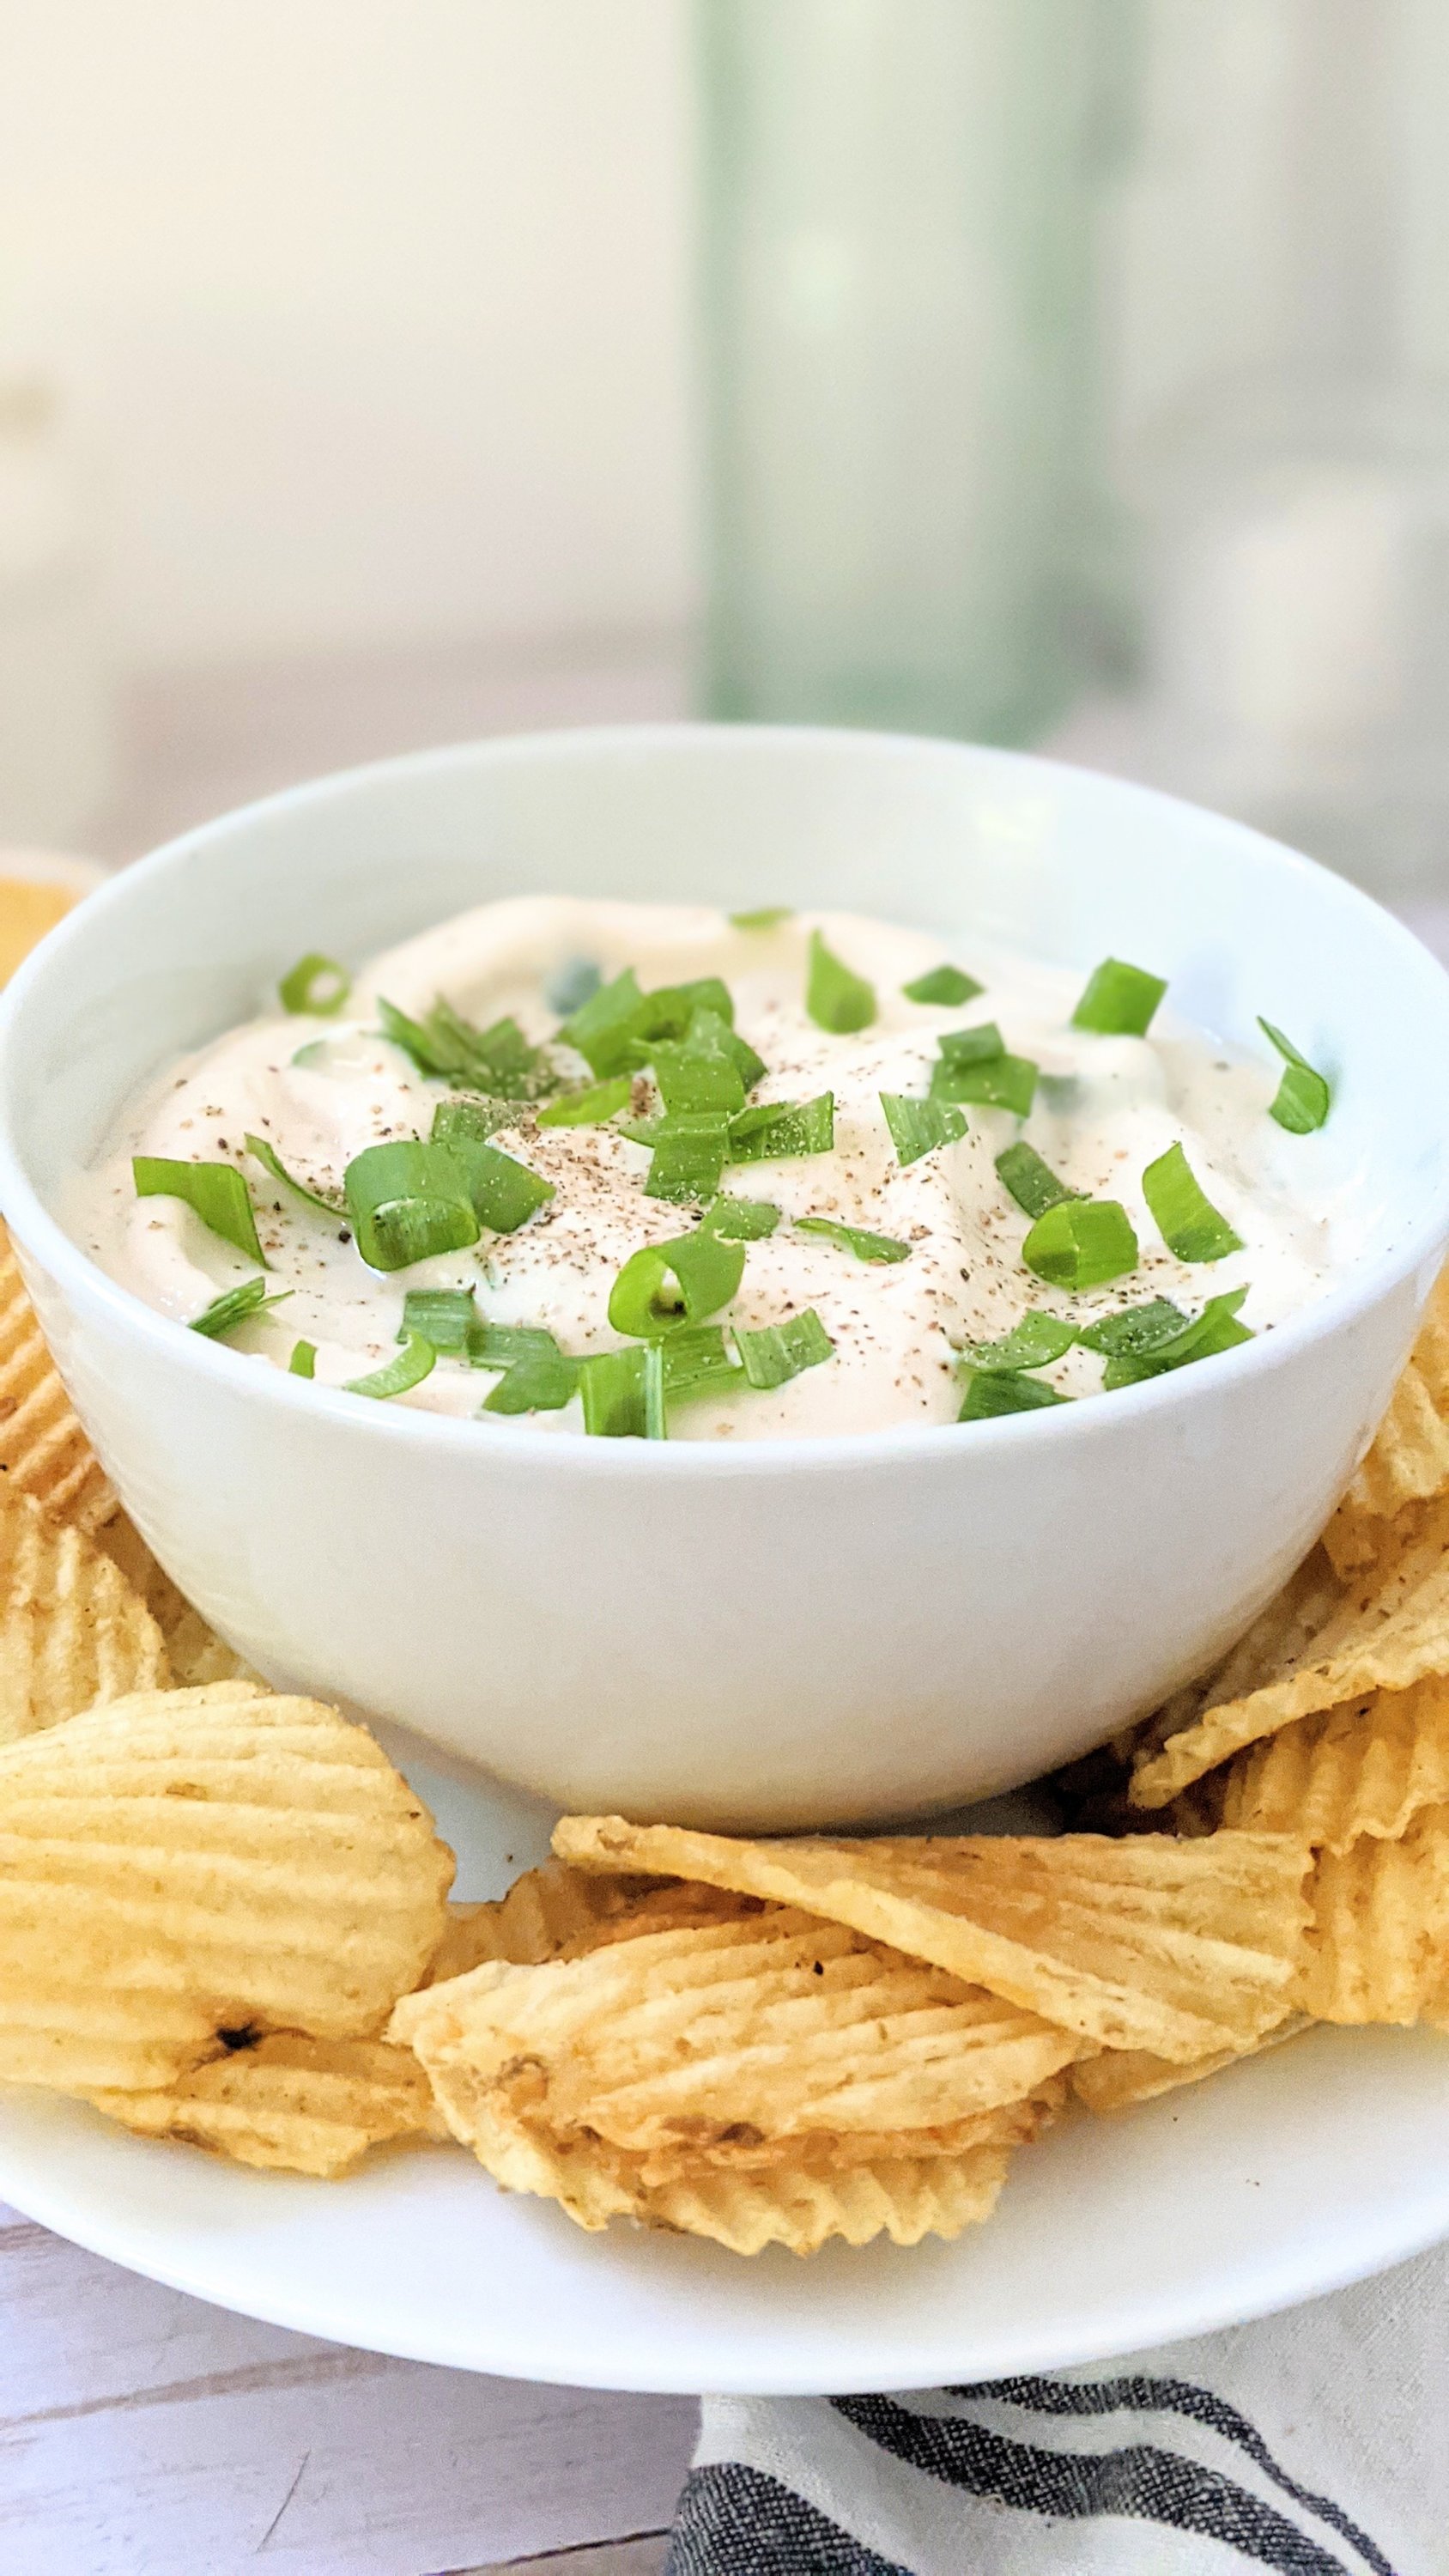 glutne free sour cream and onion dip recipe no dairy vegan low carb onion dip recipes vegetarian meatless party dips in 5 minutes last minute party appetizers vegan no dairy no meat